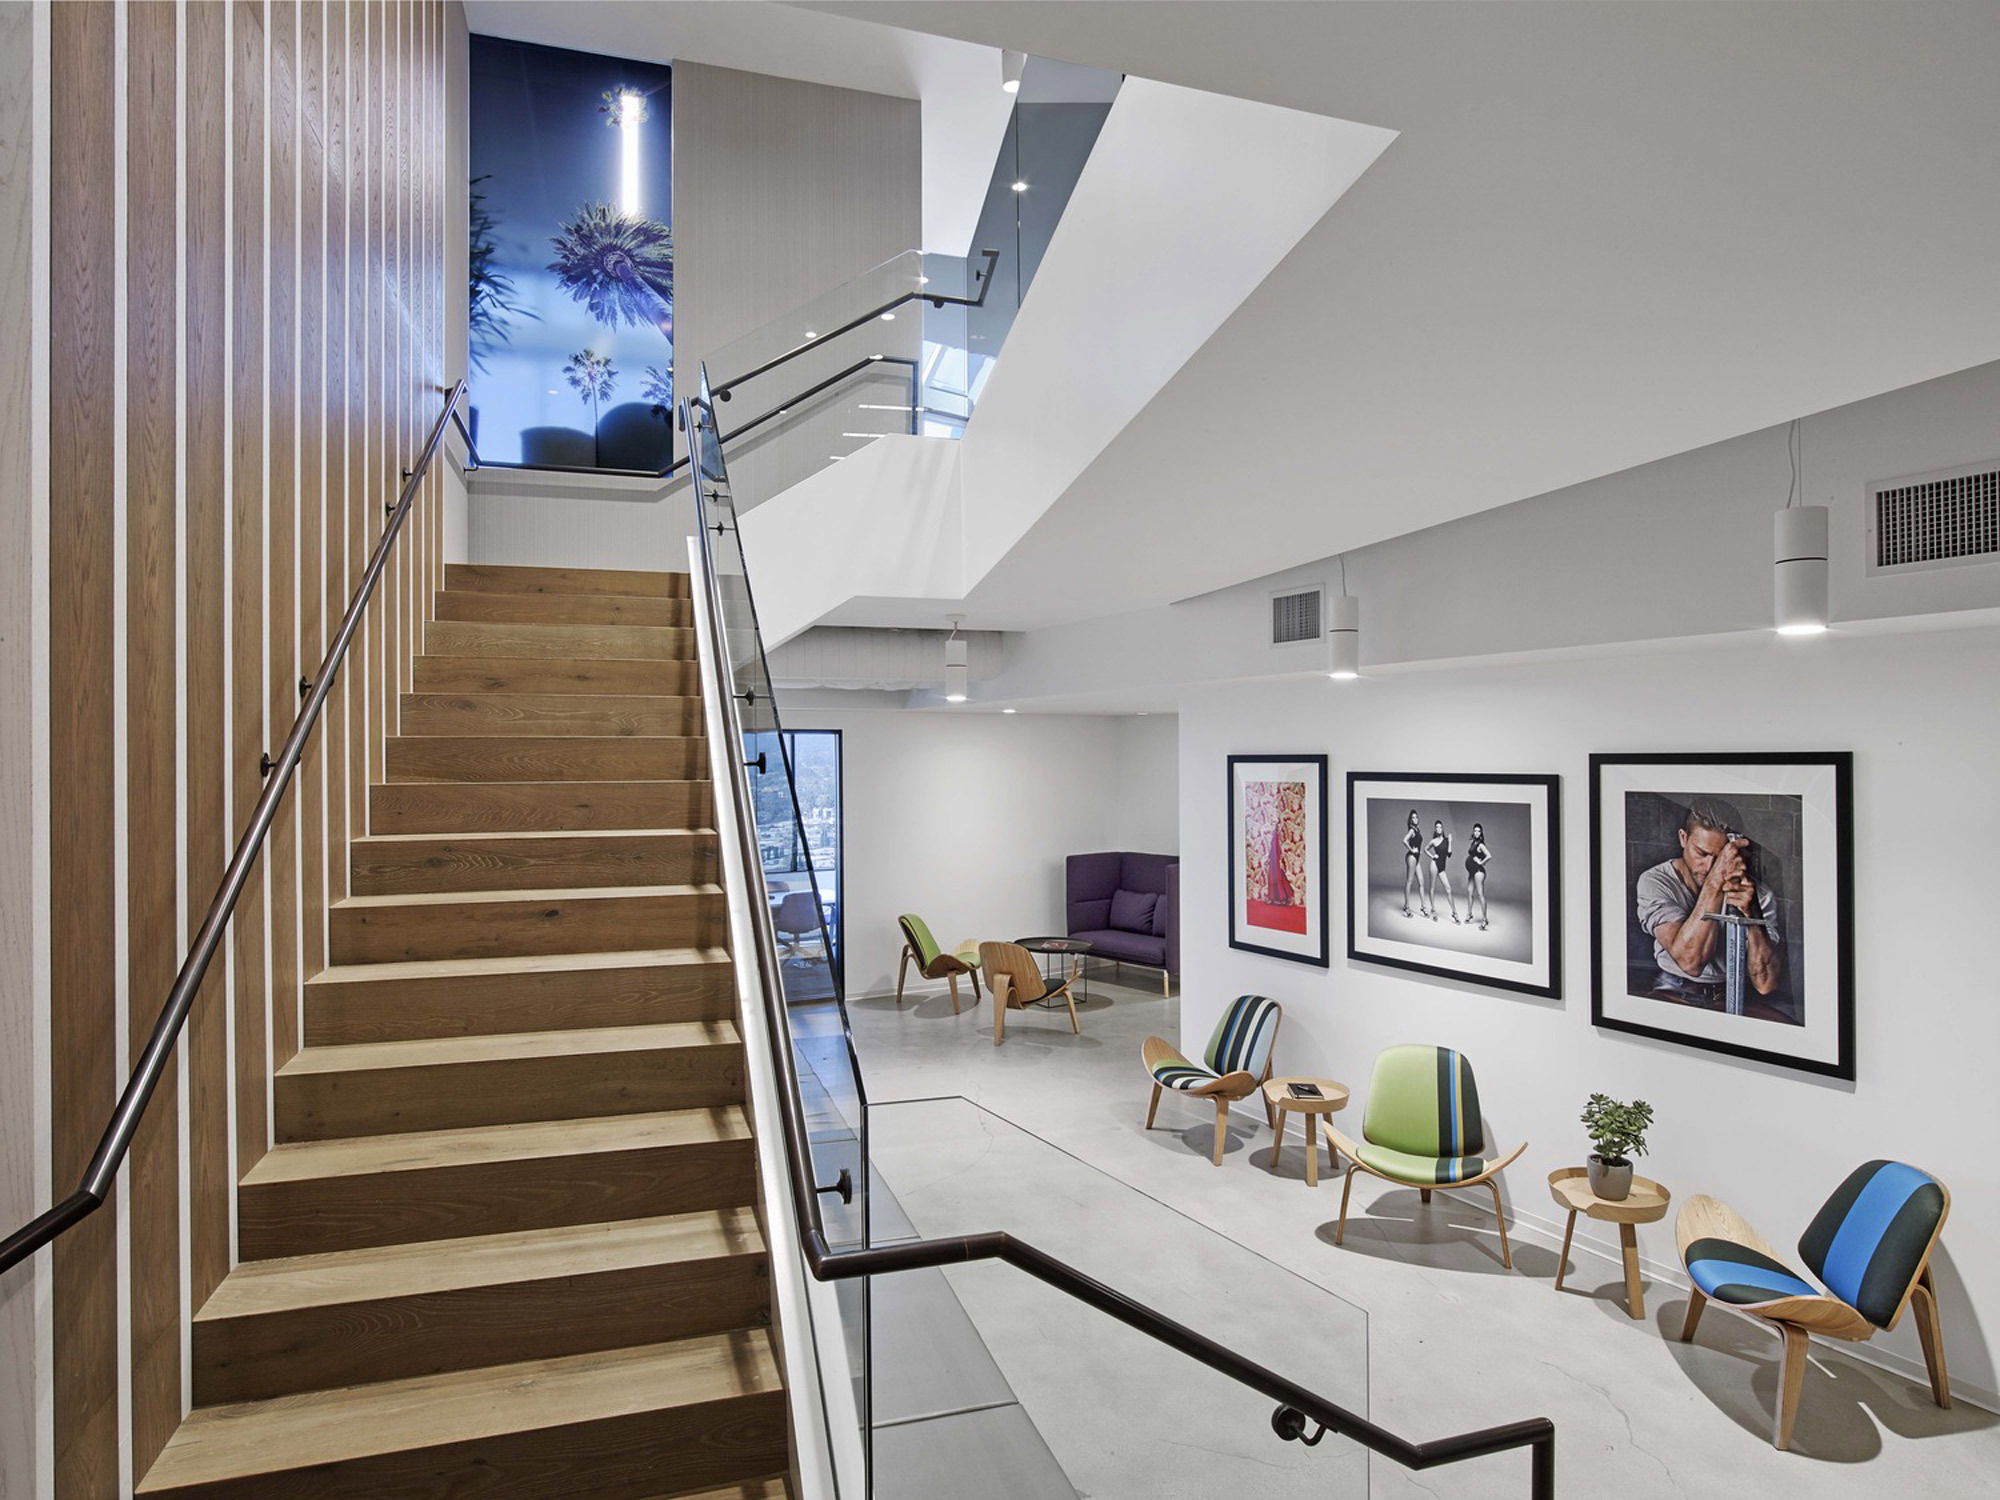 This interior features a modern staircase with warm wooden steps flanked by a sleek metal handrail, leading up to a brightly lit upper level. Below, a seating area boasts a mix of colorful mid-century modern chairs, with gallery-style framed artwork adorning the white walls.